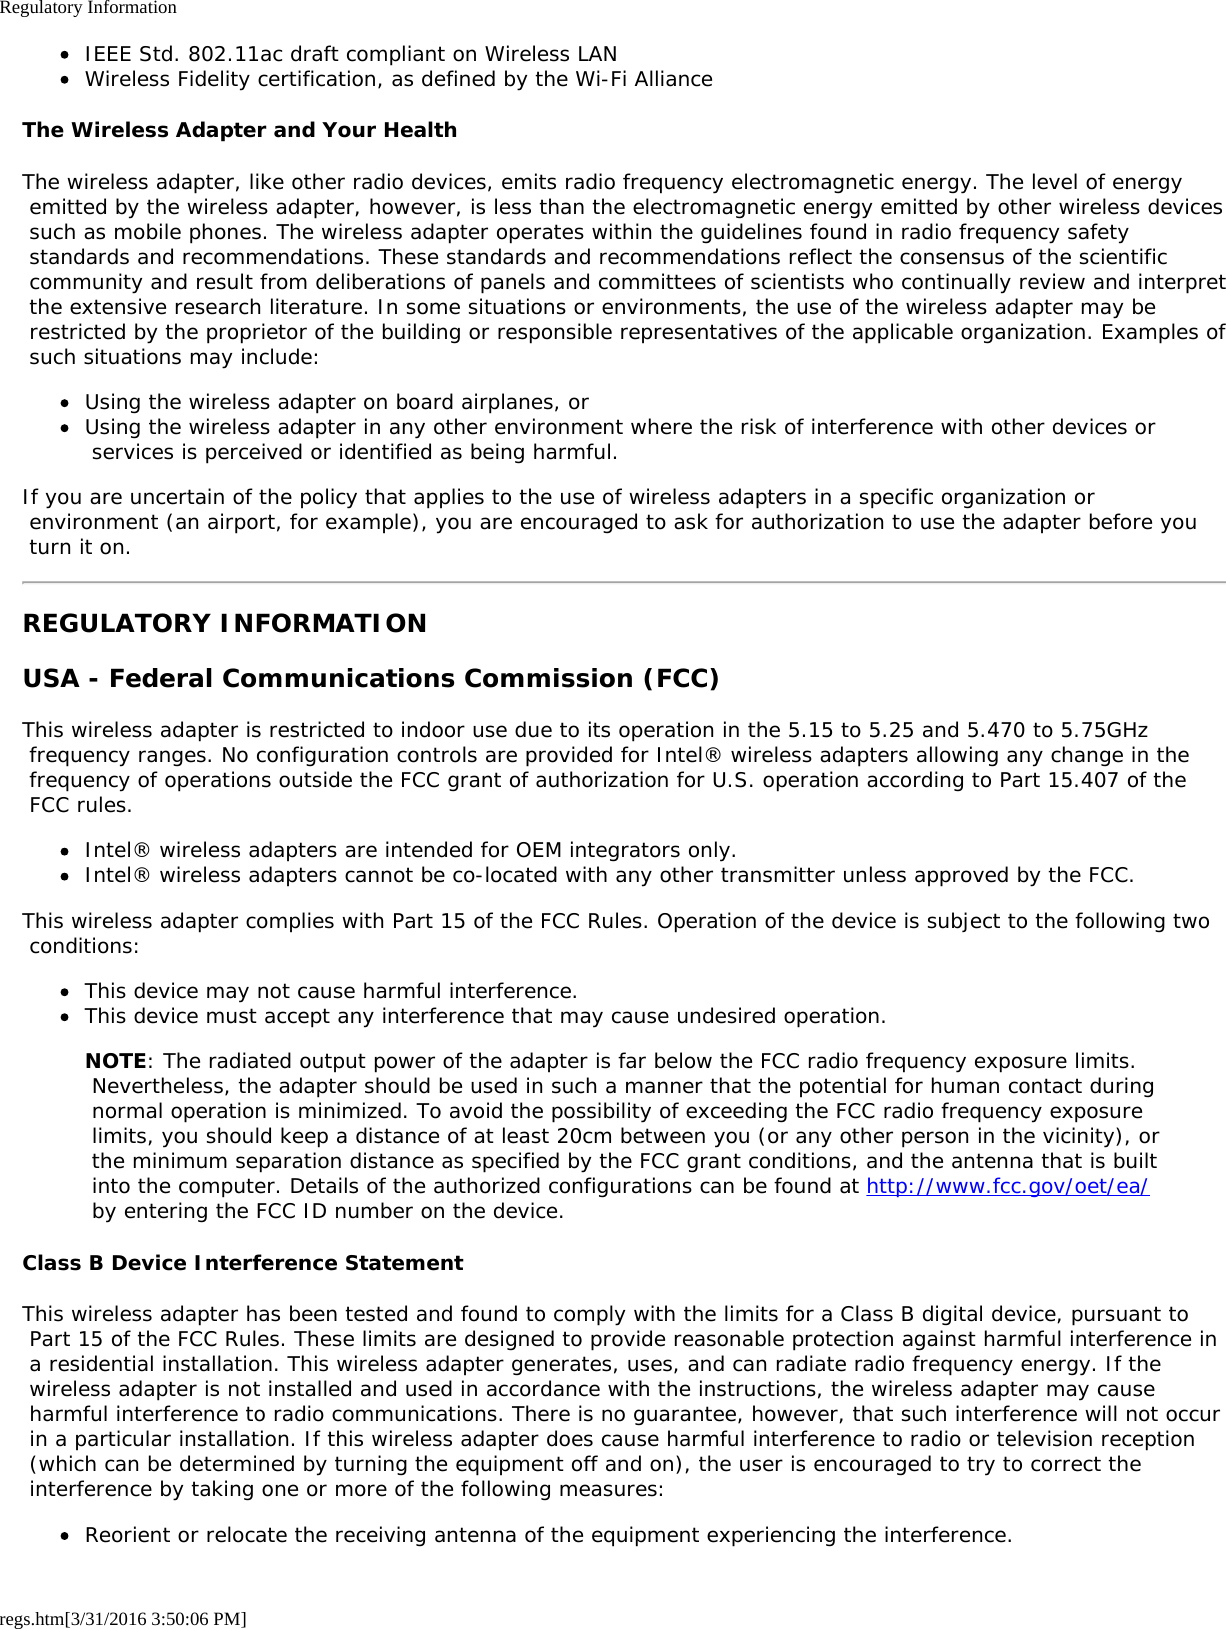 Regulatory Informationregs.htm[3/31/2016 3:50:06 PM]IEEE Std. 802.11ac draft compliant on Wireless LANWireless Fidelity certification, as defined by the Wi-Fi AllianceThe Wireless Adapter and Your HealthThe wireless adapter, like other radio devices, emits radio frequency electromagnetic energy. The level of energy emitted by the wireless adapter, however, is less than the electromagnetic energy emitted by other wireless devices such as mobile phones. The wireless adapter operates within the guidelines found in radio frequency safety standards and recommendations. These standards and recommendations reflect the consensus of the scientific community and result from deliberations of panels and committees of scientists who continually review and interpret the extensive research literature. In some situations or environments, the use of the wireless adapter may be restricted by the proprietor of the building or responsible representatives of the applicable organization. Examples of such situations may include:Using the wireless adapter on board airplanes, orUsing the wireless adapter in any other environment where the risk of interference with other devices or services is perceived or identified as being harmful.If you are uncertain of the policy that applies to the use of wireless adapters in a specific organization or environment (an airport, for example), you are encouraged to ask for authorization to use the adapter before you turn it on.REGULATORY INFORMATIONUSA - Federal Communications Commission (FCC)This wireless adapter is restricted to indoor use due to its operation in the 5.15 to 5.25 and 5.470 to 5.75GHz frequency ranges. No configuration controls are provided for Intel® wireless adapters allowing any change in the frequency of operations outside the FCC grant of authorization for U.S. operation according to Part 15.407 of the FCC rules.Intel® wireless adapters are intended for OEM integrators only.Intel® wireless adapters cannot be co-located with any other transmitter unless approved by the FCC.This wireless adapter complies with Part 15 of the FCC Rules. Operation of the device is subject to the following two conditions:This device may not cause harmful interference.This device must accept any interference that may cause undesired operation.NOTE: The radiated output power of the adapter is far below the FCC radio frequency exposure limits. Nevertheless, the adapter should be used in such a manner that the potential for human contact during normal operation is minimized. To avoid the possibility of exceeding the FCC radio frequency exposure limits, you should keep a distance of at least 20cm between you (or any other person in the vicinity), or the minimum separation distance as specified by the FCC grant conditions, and the antenna that is built into the computer. Details of the authorized configurations can be found at http://www.fcc.gov/oet/ea/ by entering the FCC ID number on the device.Class B Device Interference StatementThis wireless adapter has been tested and found to comply with the limits for a Class B digital device, pursuant to Part 15 of the FCC Rules. These limits are designed to provide reasonable protection against harmful interference in a residential installation. This wireless adapter generates, uses, and can radiate radio frequency energy. If the wireless adapter is not installed and used in accordance with the instructions, the wireless adapter may cause harmful interference to radio communications. There is no guarantee, however, that such interference will not occur in a particular installation. If this wireless adapter does cause harmful interference to radio or television reception (which can be determined by turning the equipment off and on), the user is encouraged to try to correct the interference by taking one or more of the following measures:Reorient or relocate the receiving antenna of the equipment experiencing the interference.